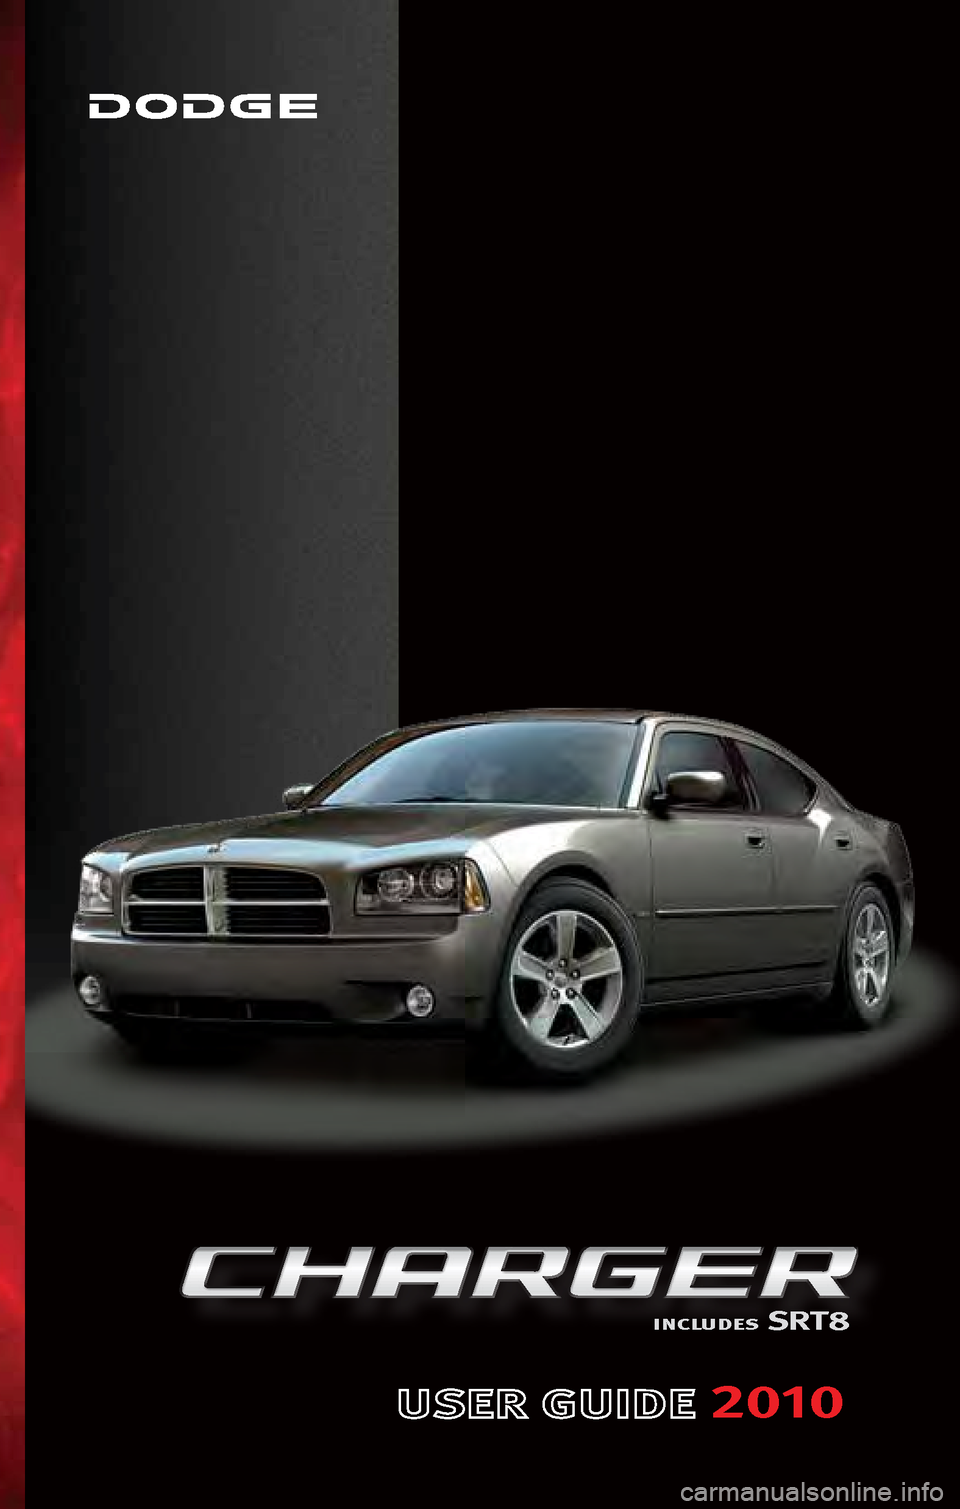 DODGE CHARGER 2010 7.G User Guide 2010
includes SRT8    